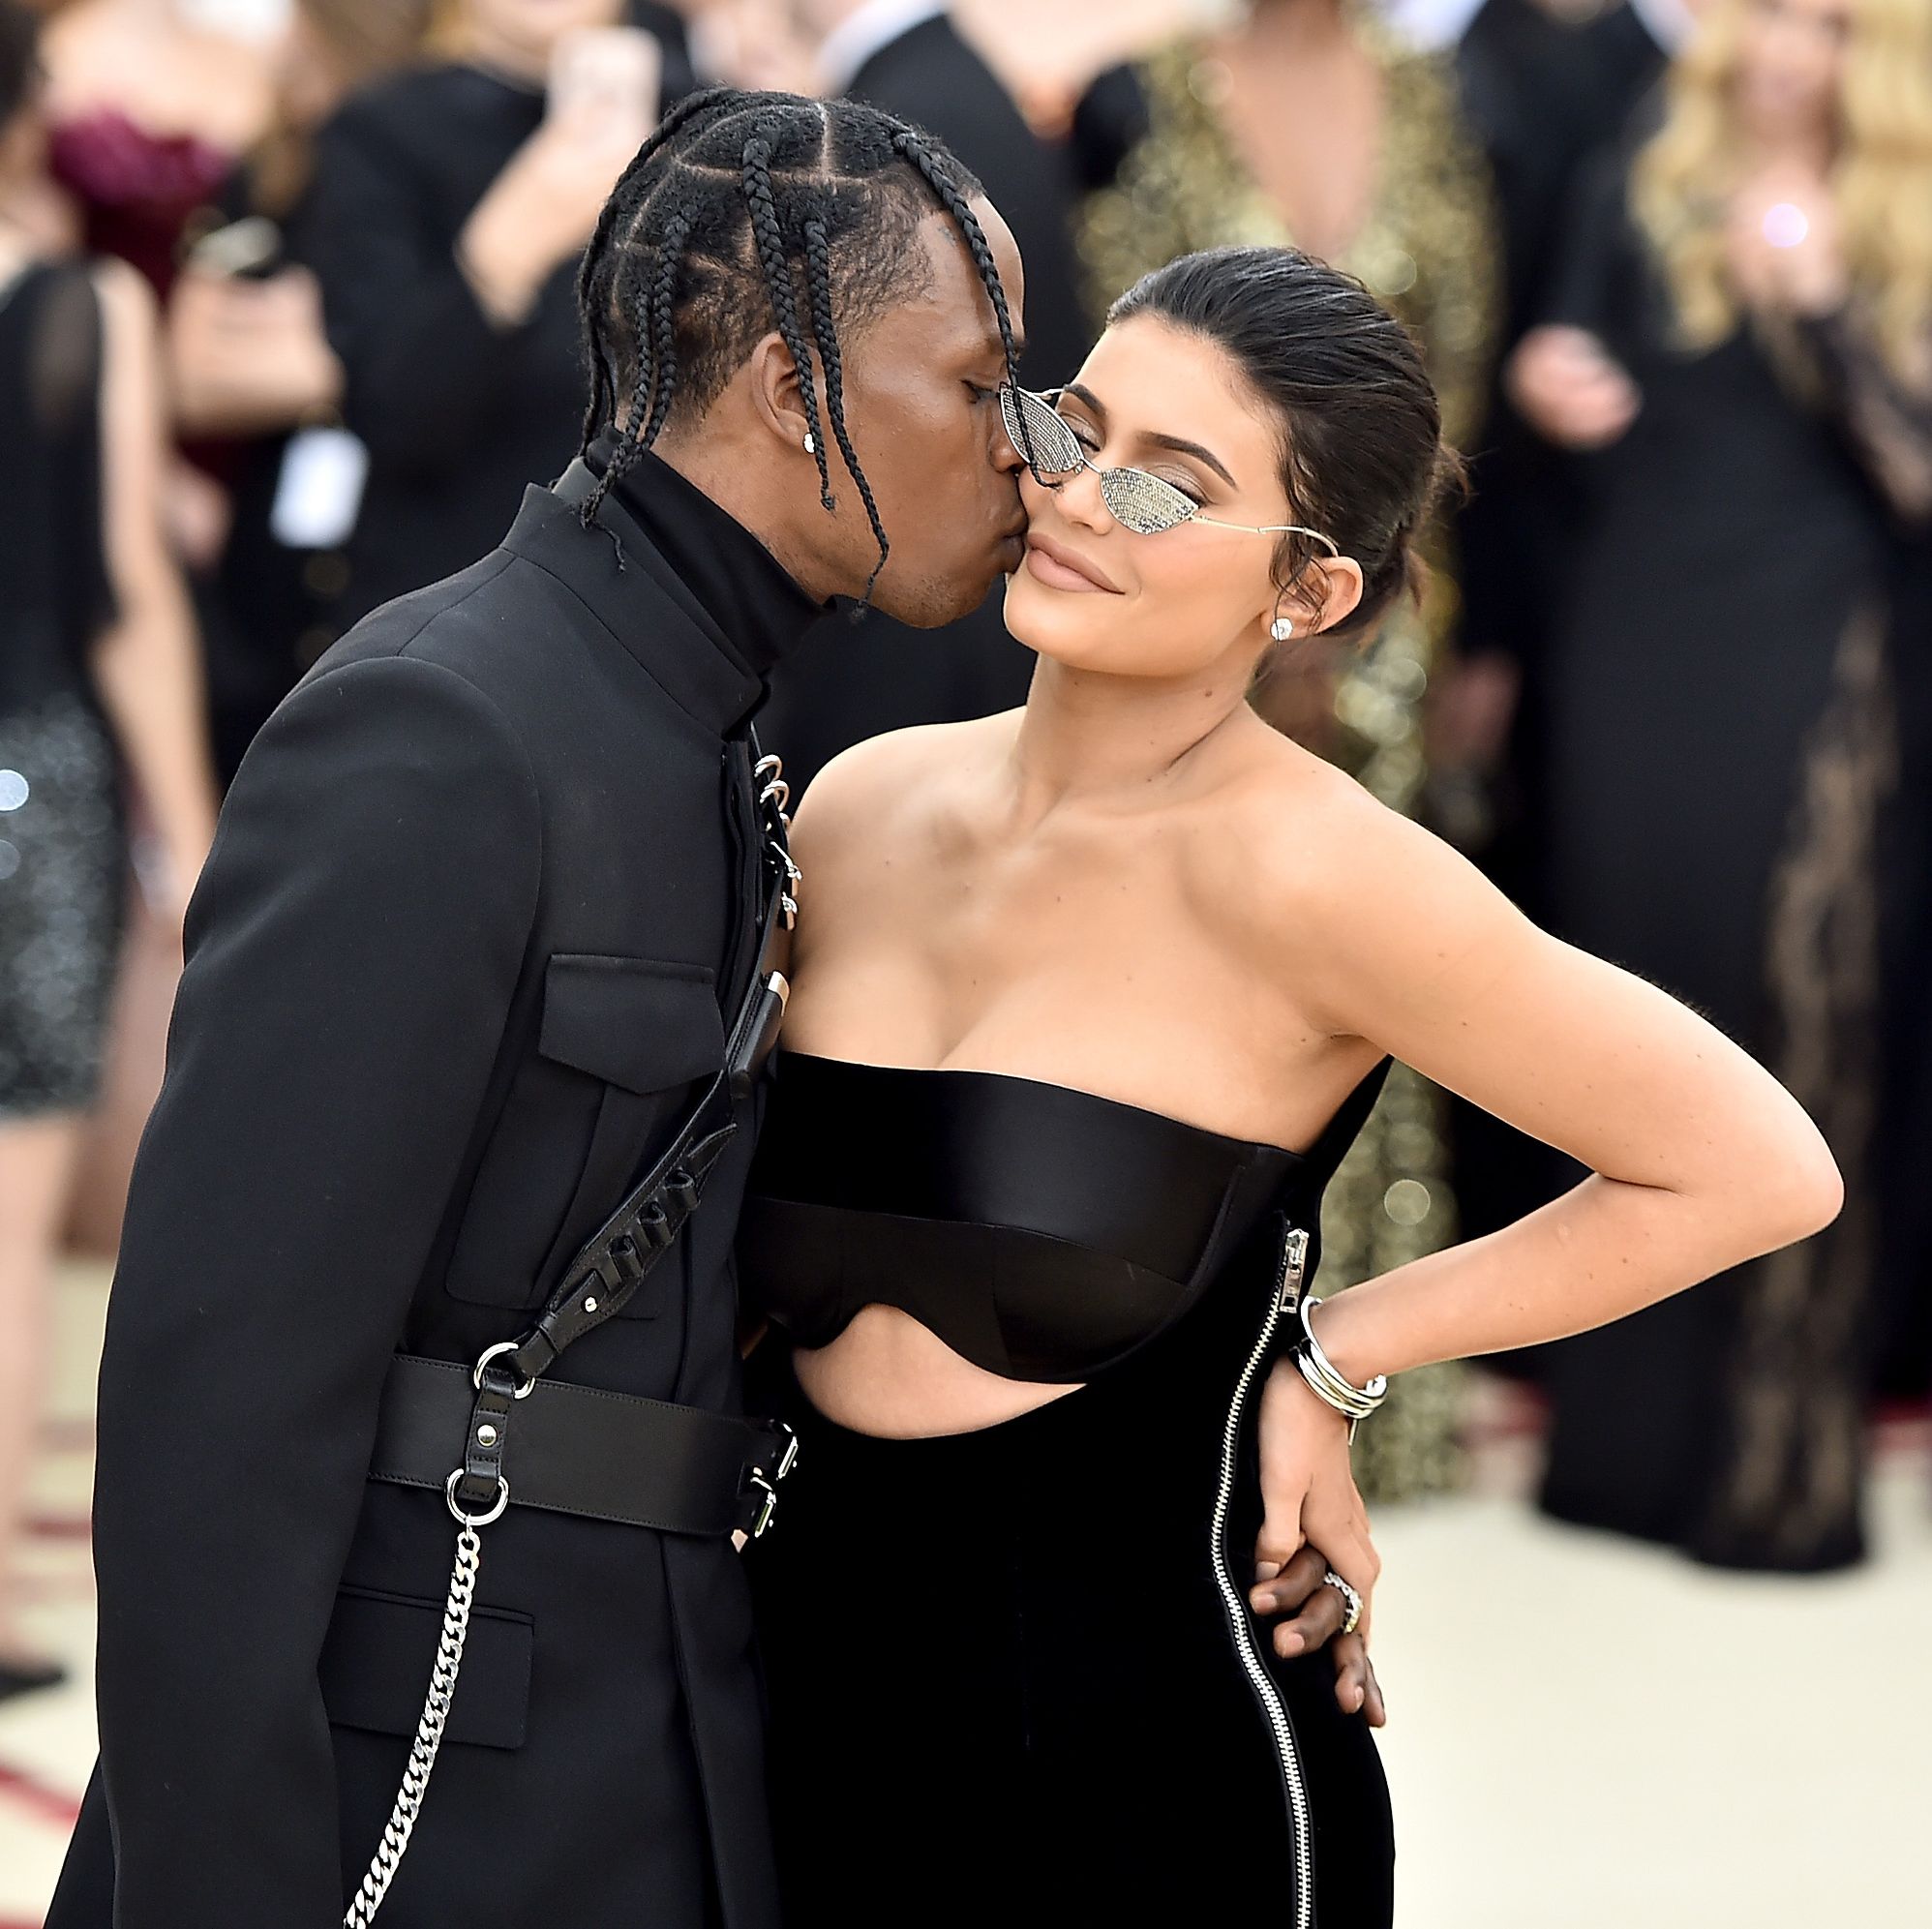 https://hips.hearstapps.com/hmg-prod/images/travis-scott-and-kylie-jenner-attend-the-heavenly-bodies-news-photo-958396666-1554208234.jpg?crop=0.665xw:1.00xh;0.165xw,0&resize=2048:*